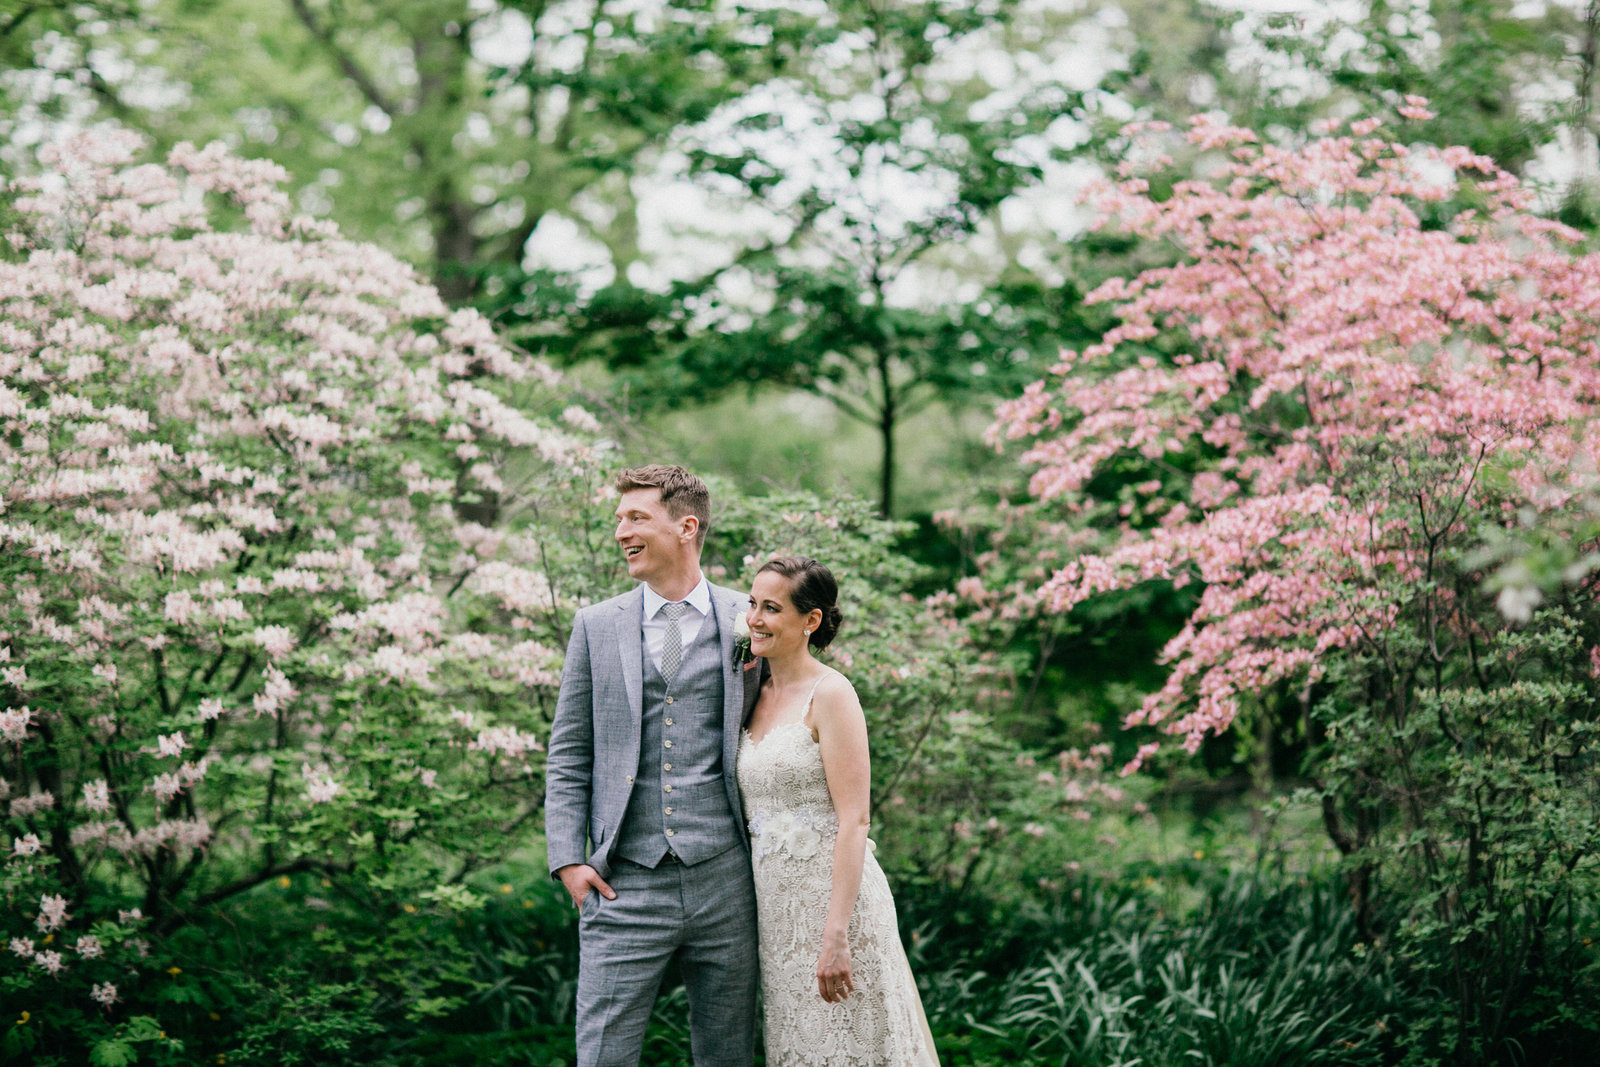 Everything in bloom at this spring  wedding at Bartram's Garden.